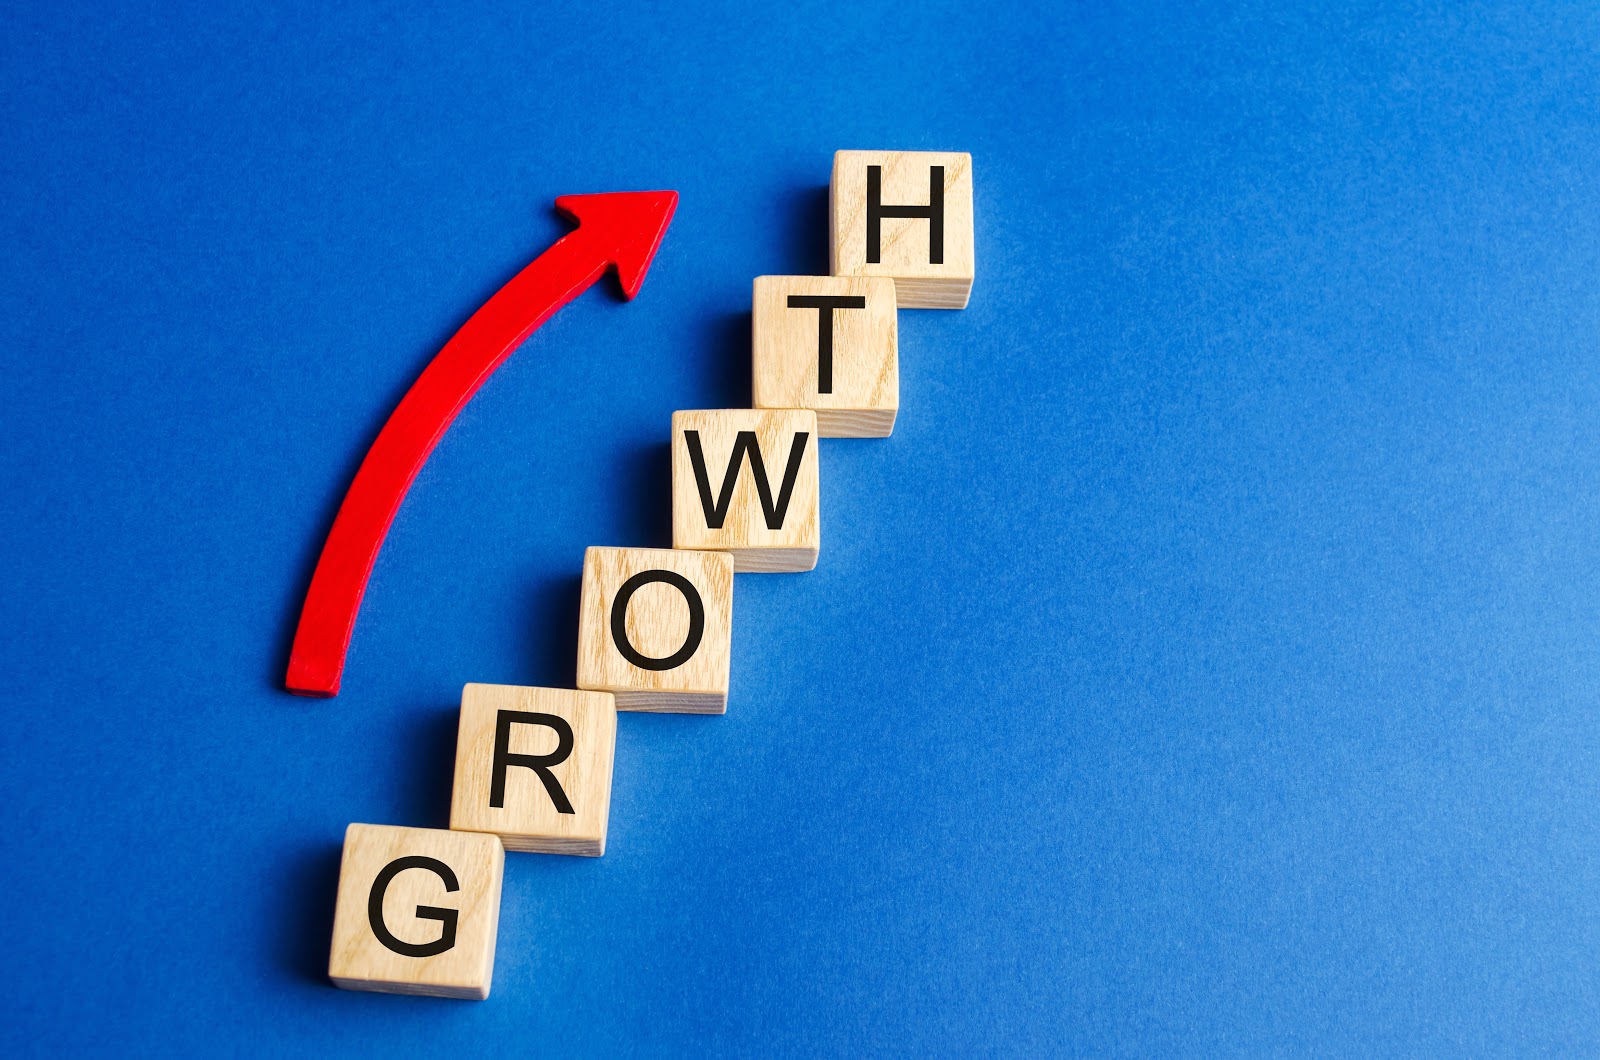 Letter tiles spelling out "growth" appear on a blue background. A red arrow points up. 